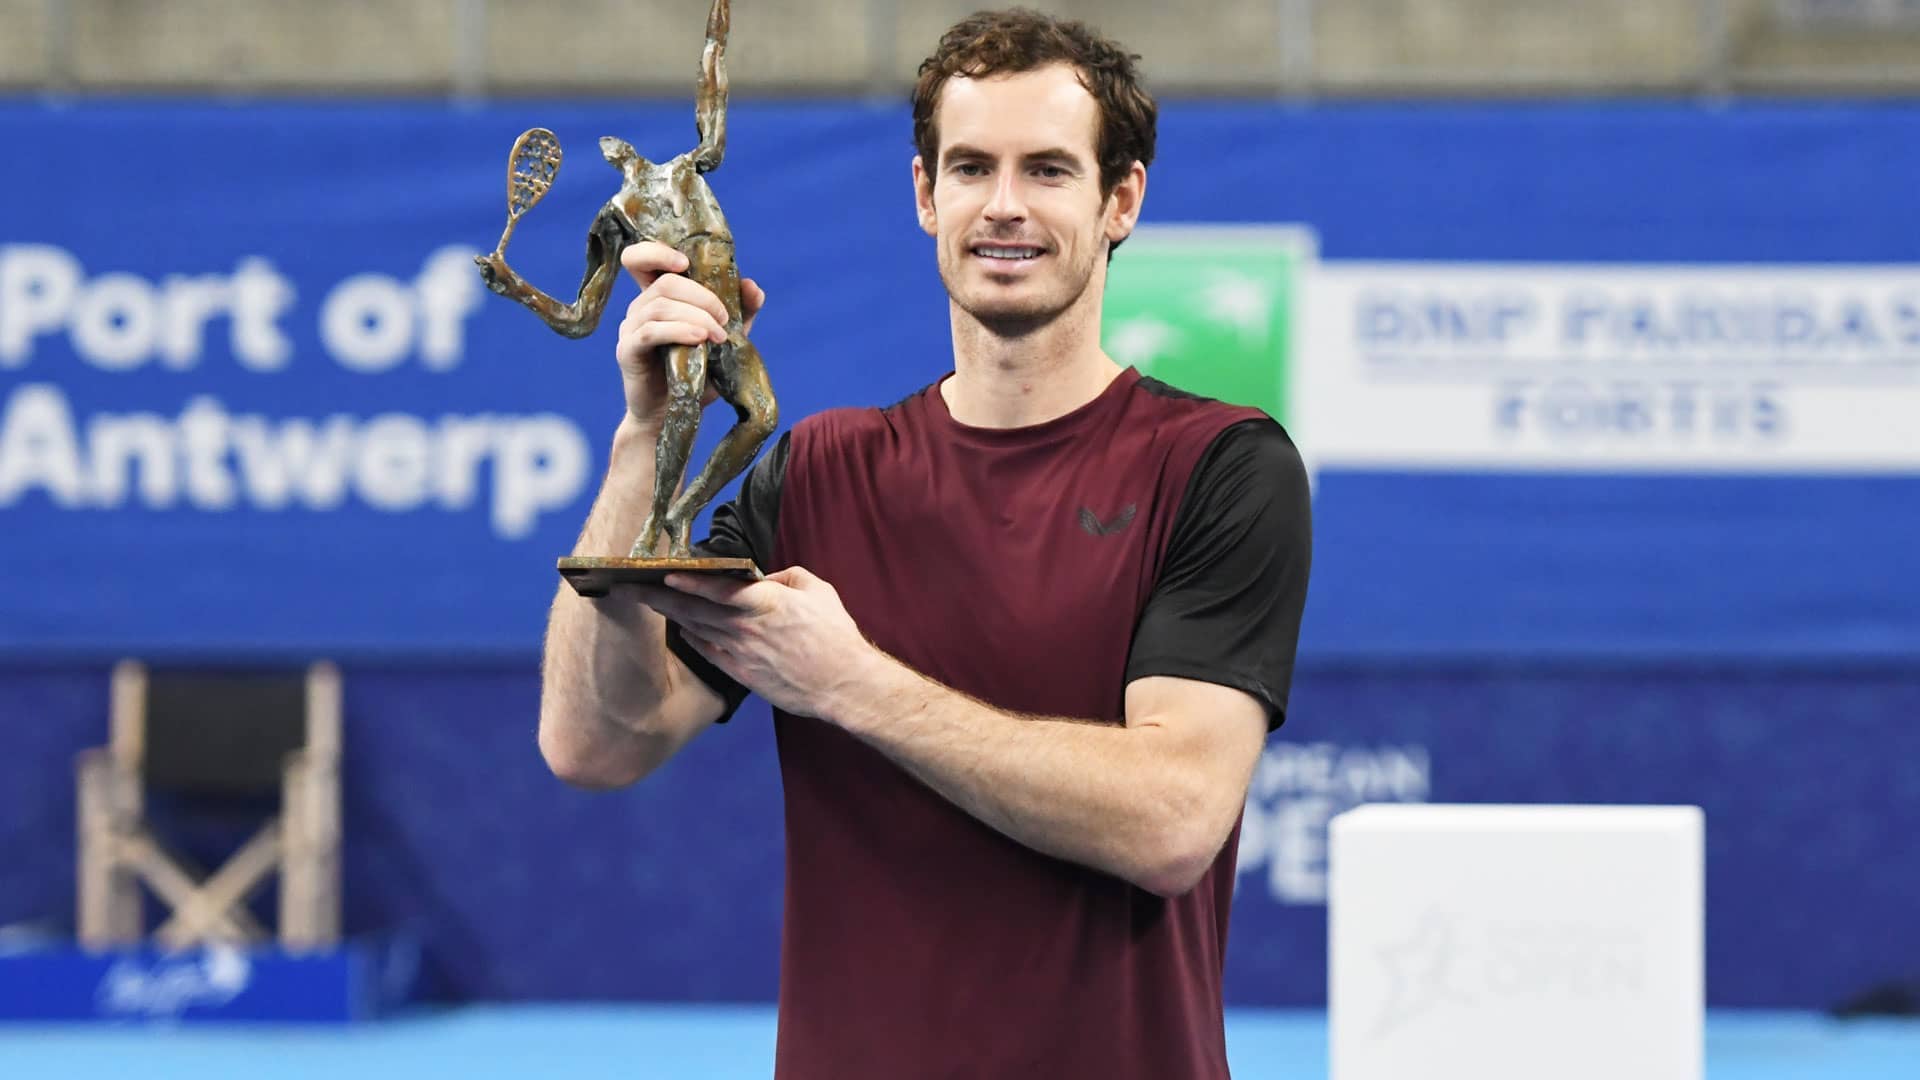 Andy Murray holds the Antwerp 2019 trophy